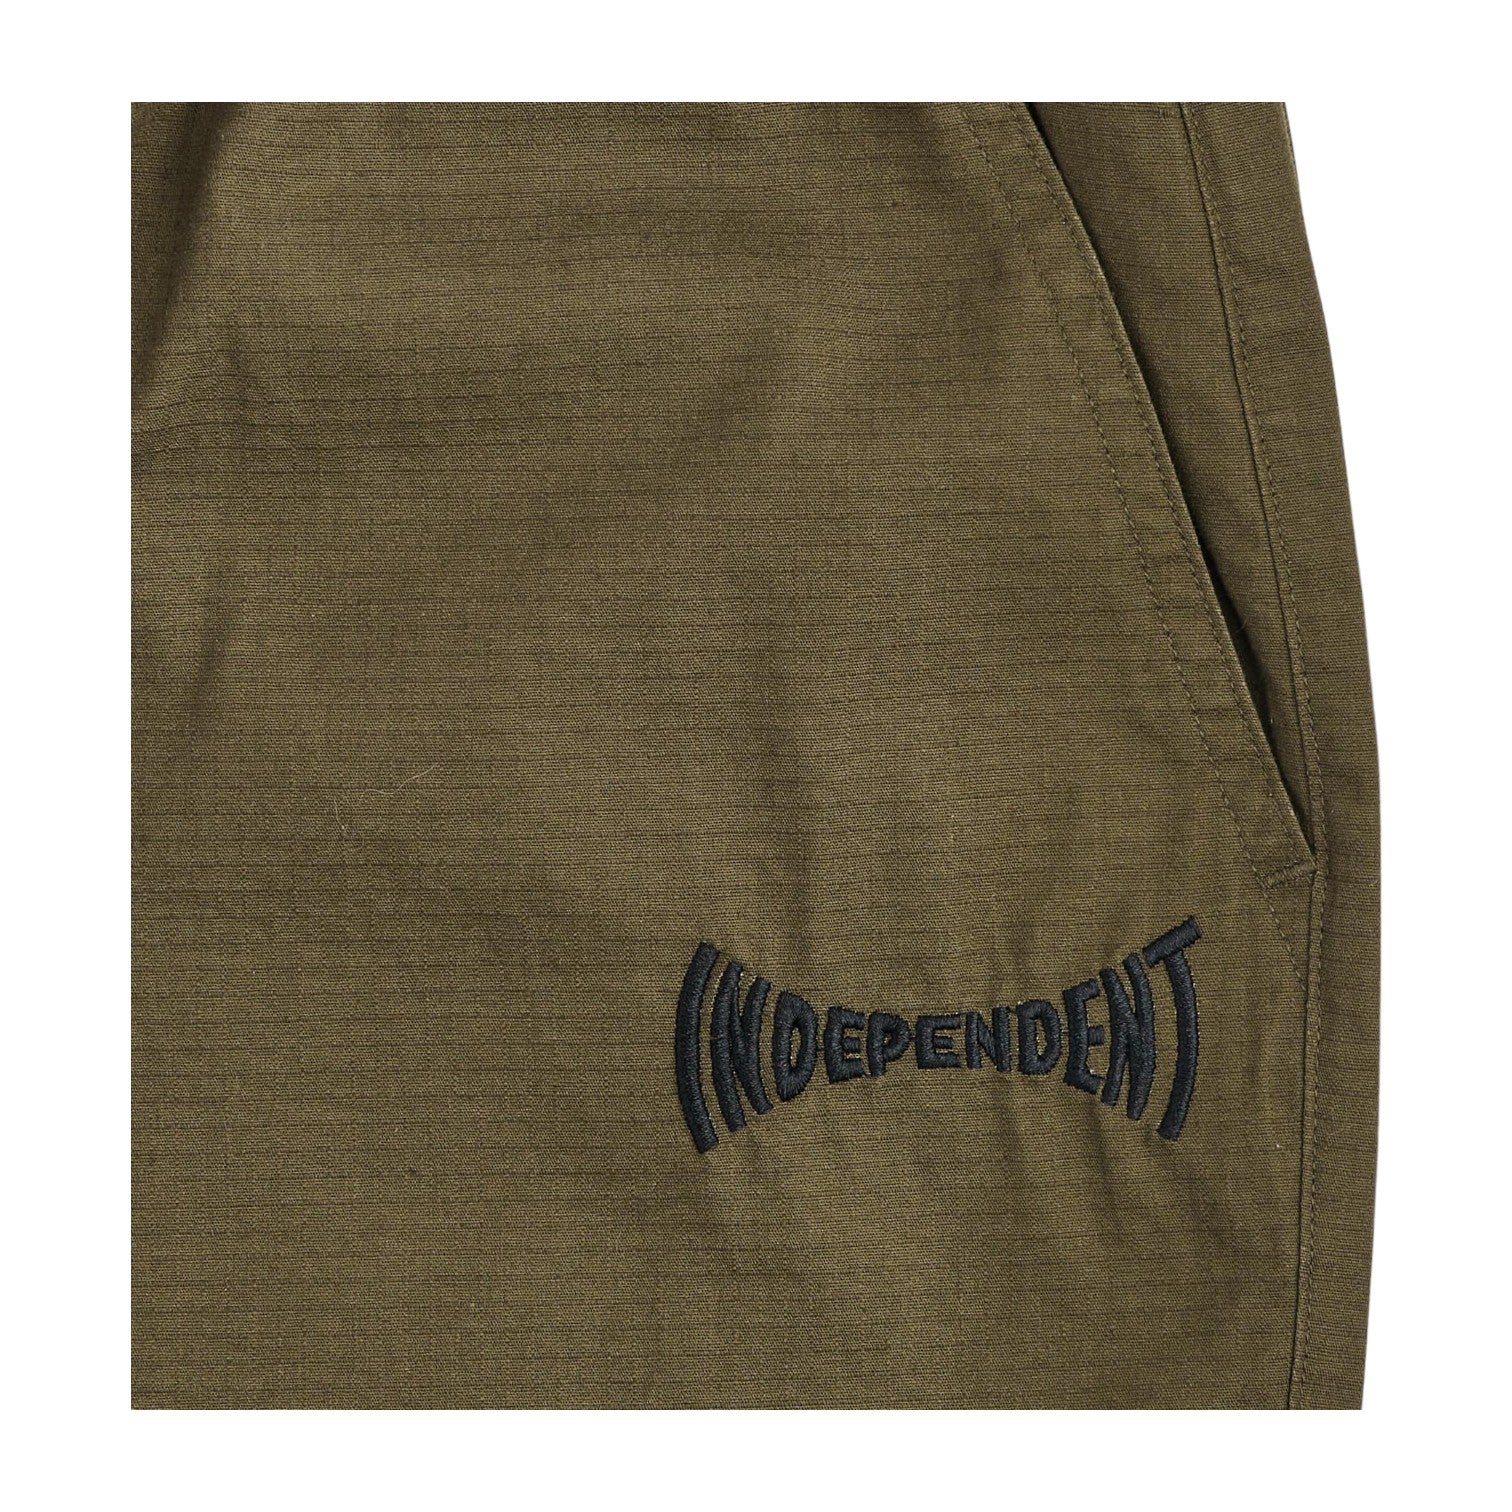 Independent Span Pull On Shorts - Chocolate